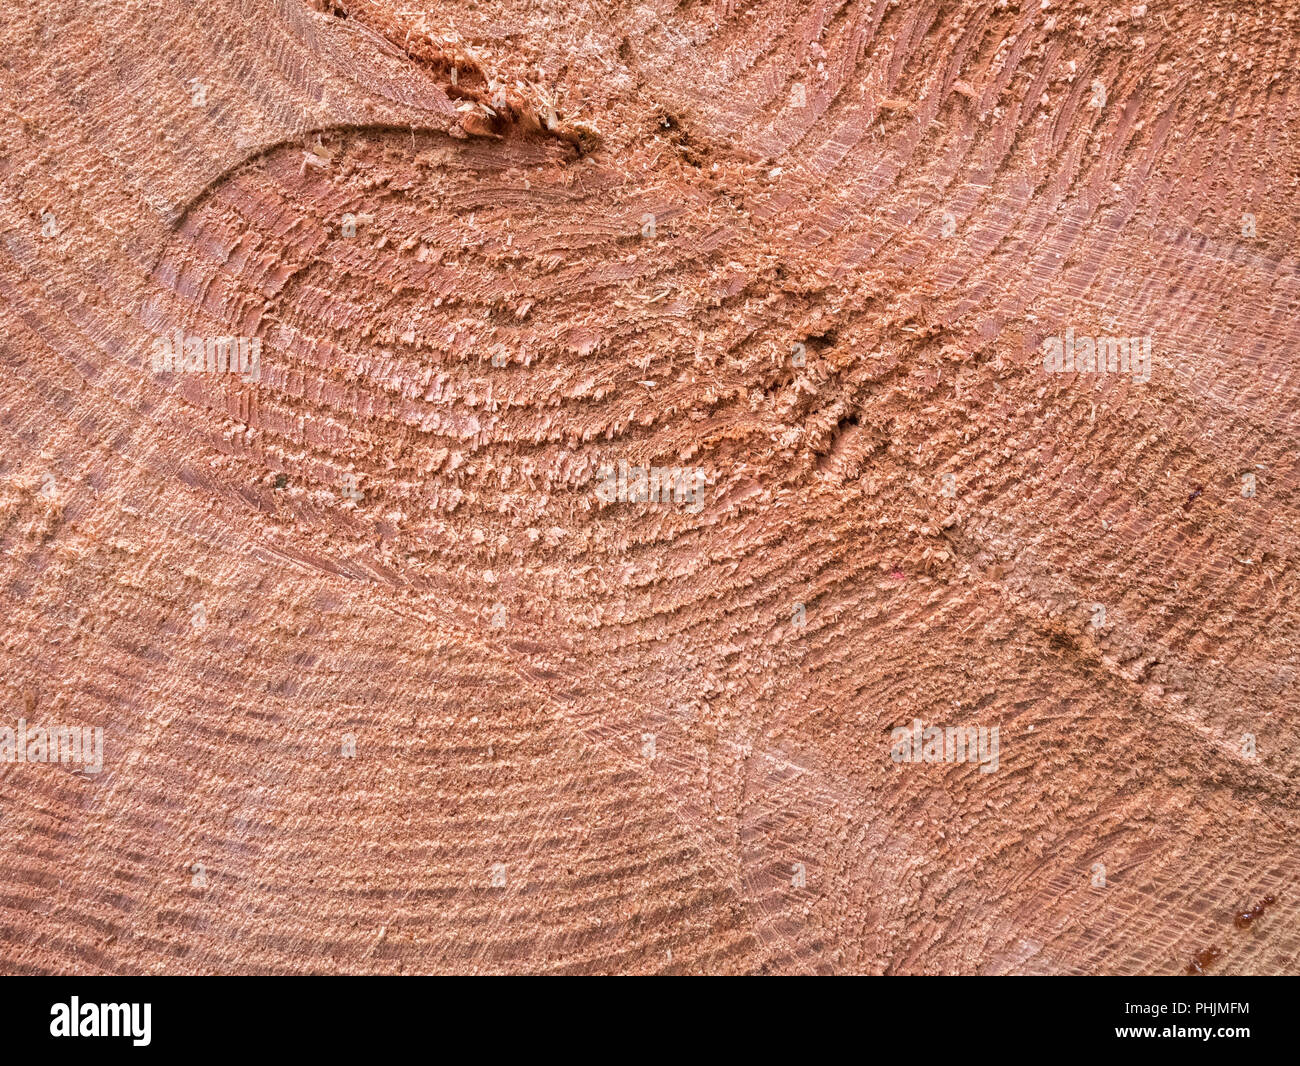 Cross section of a sawn conifer tree species (unknown type), showing wood rings. Cross section of wood, tree trunk rings. Stock Photo